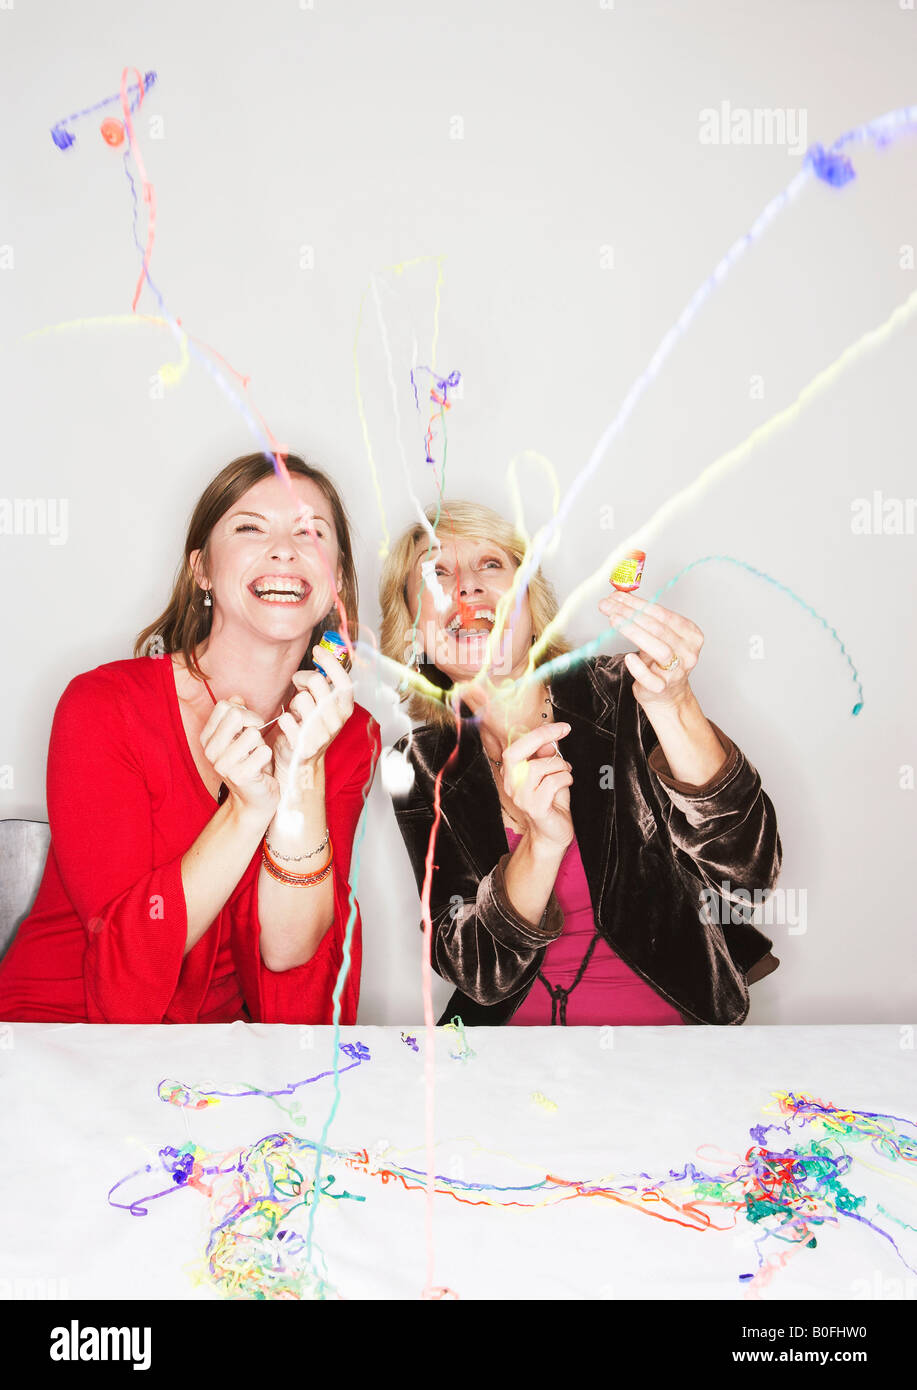 Two women with party poppers Stock Photo